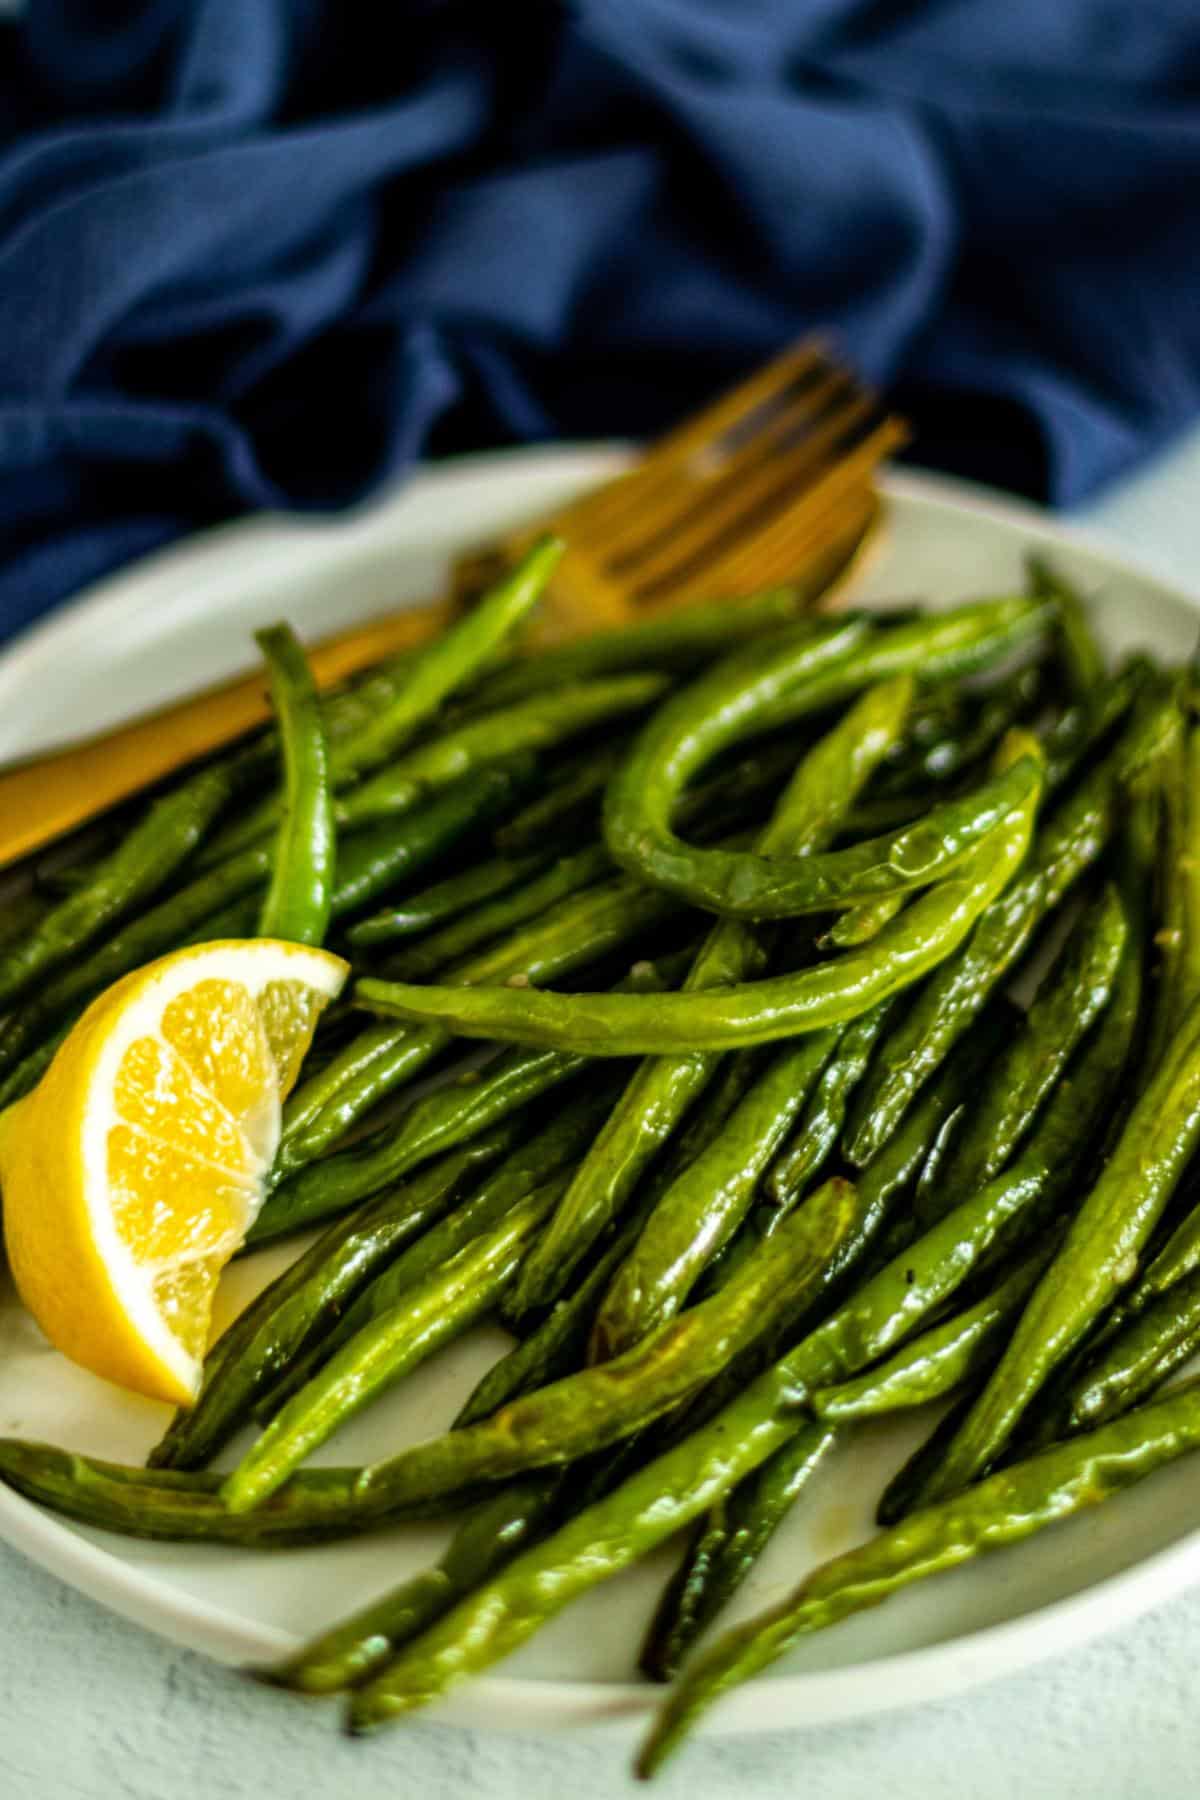 Green beans and a lemon wedge on a serving platter.